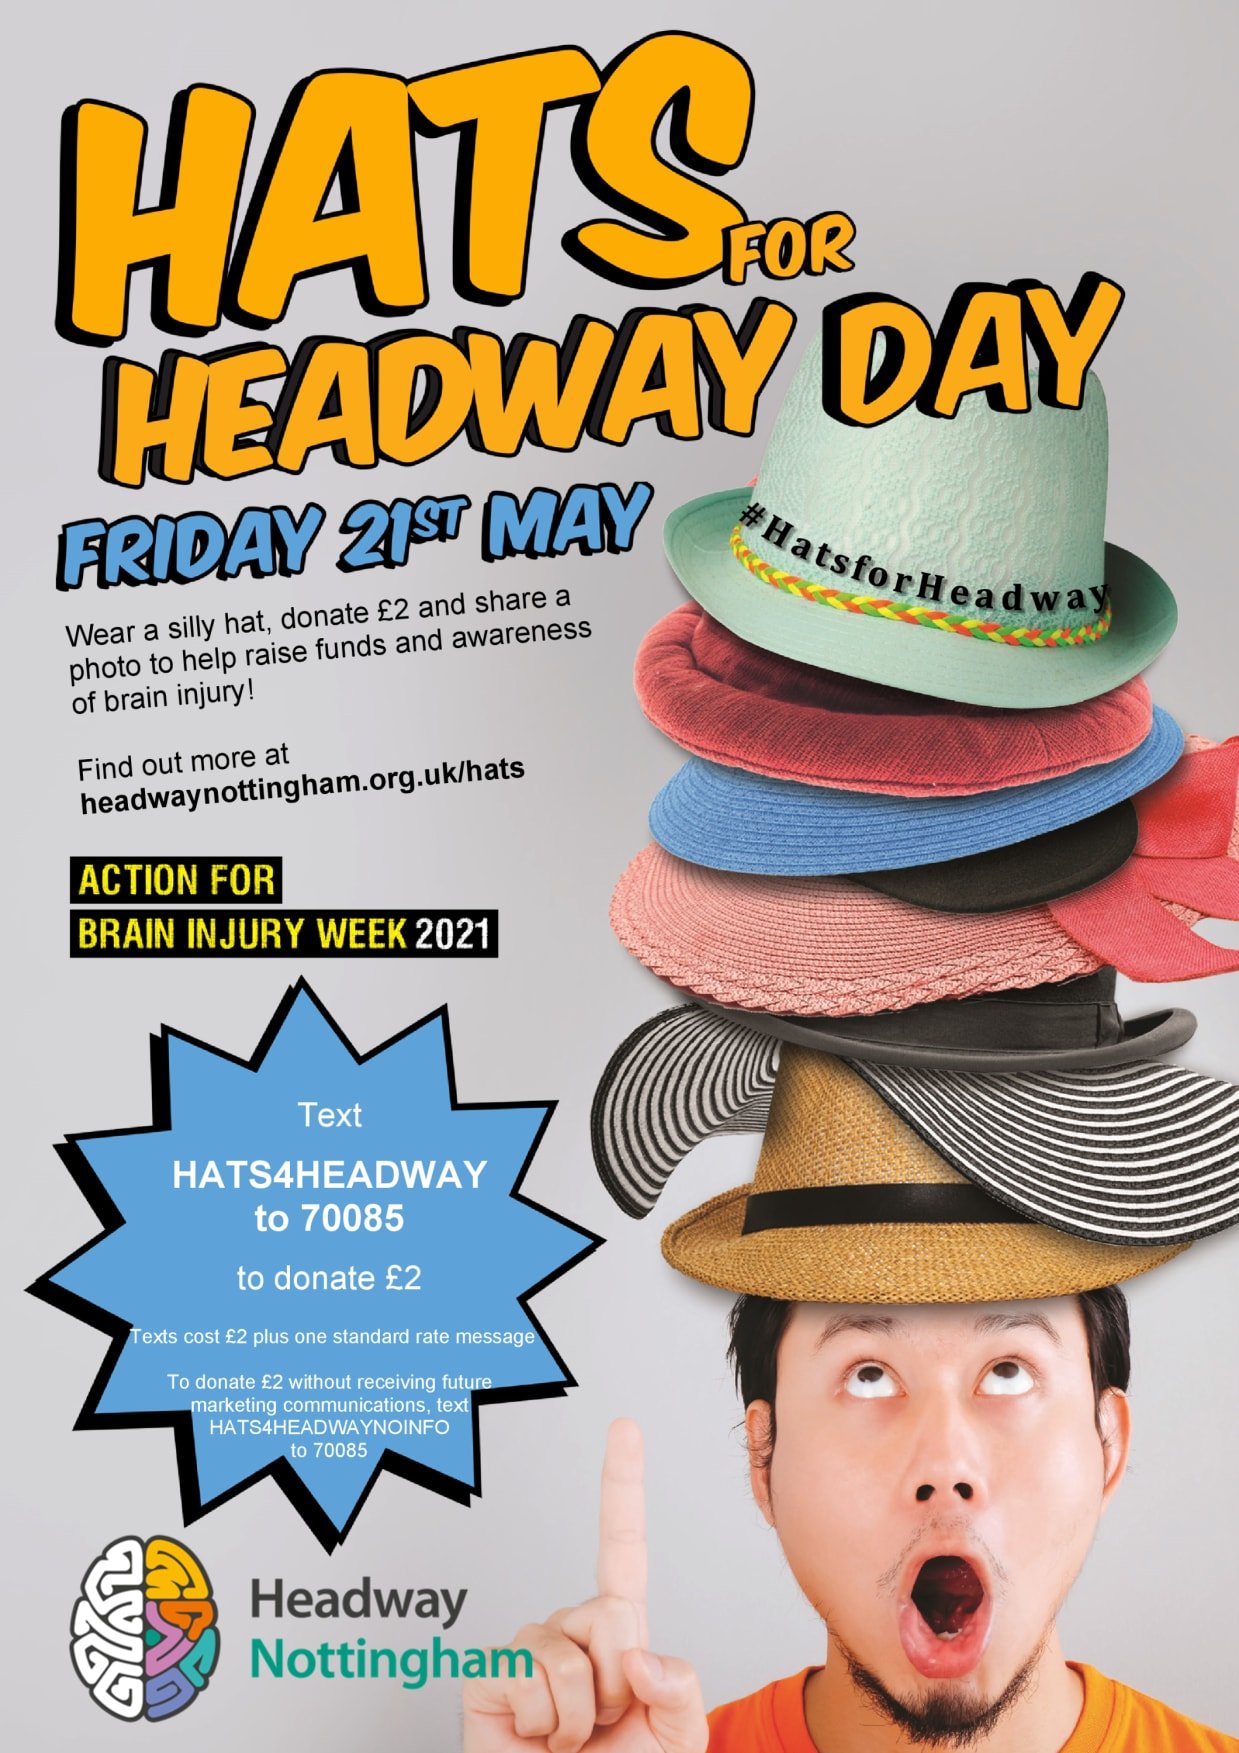 Wear your silly hat and show your support for people with brain injuries in Nottingham